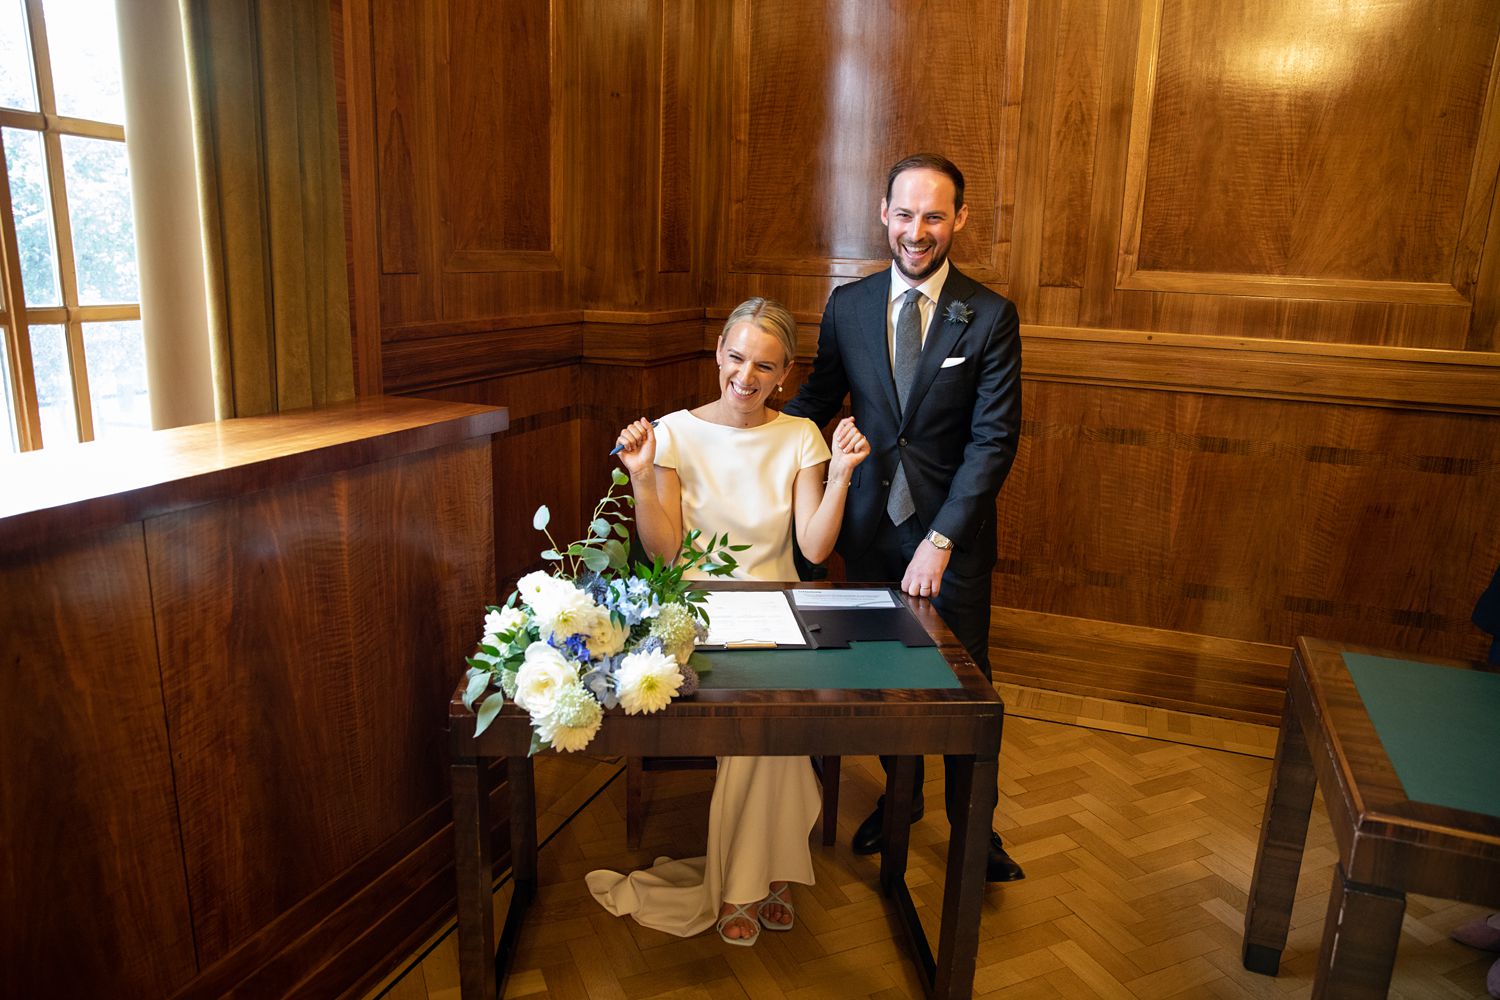 hackney town hall wedding with wedding reception at royal inn in victoria park